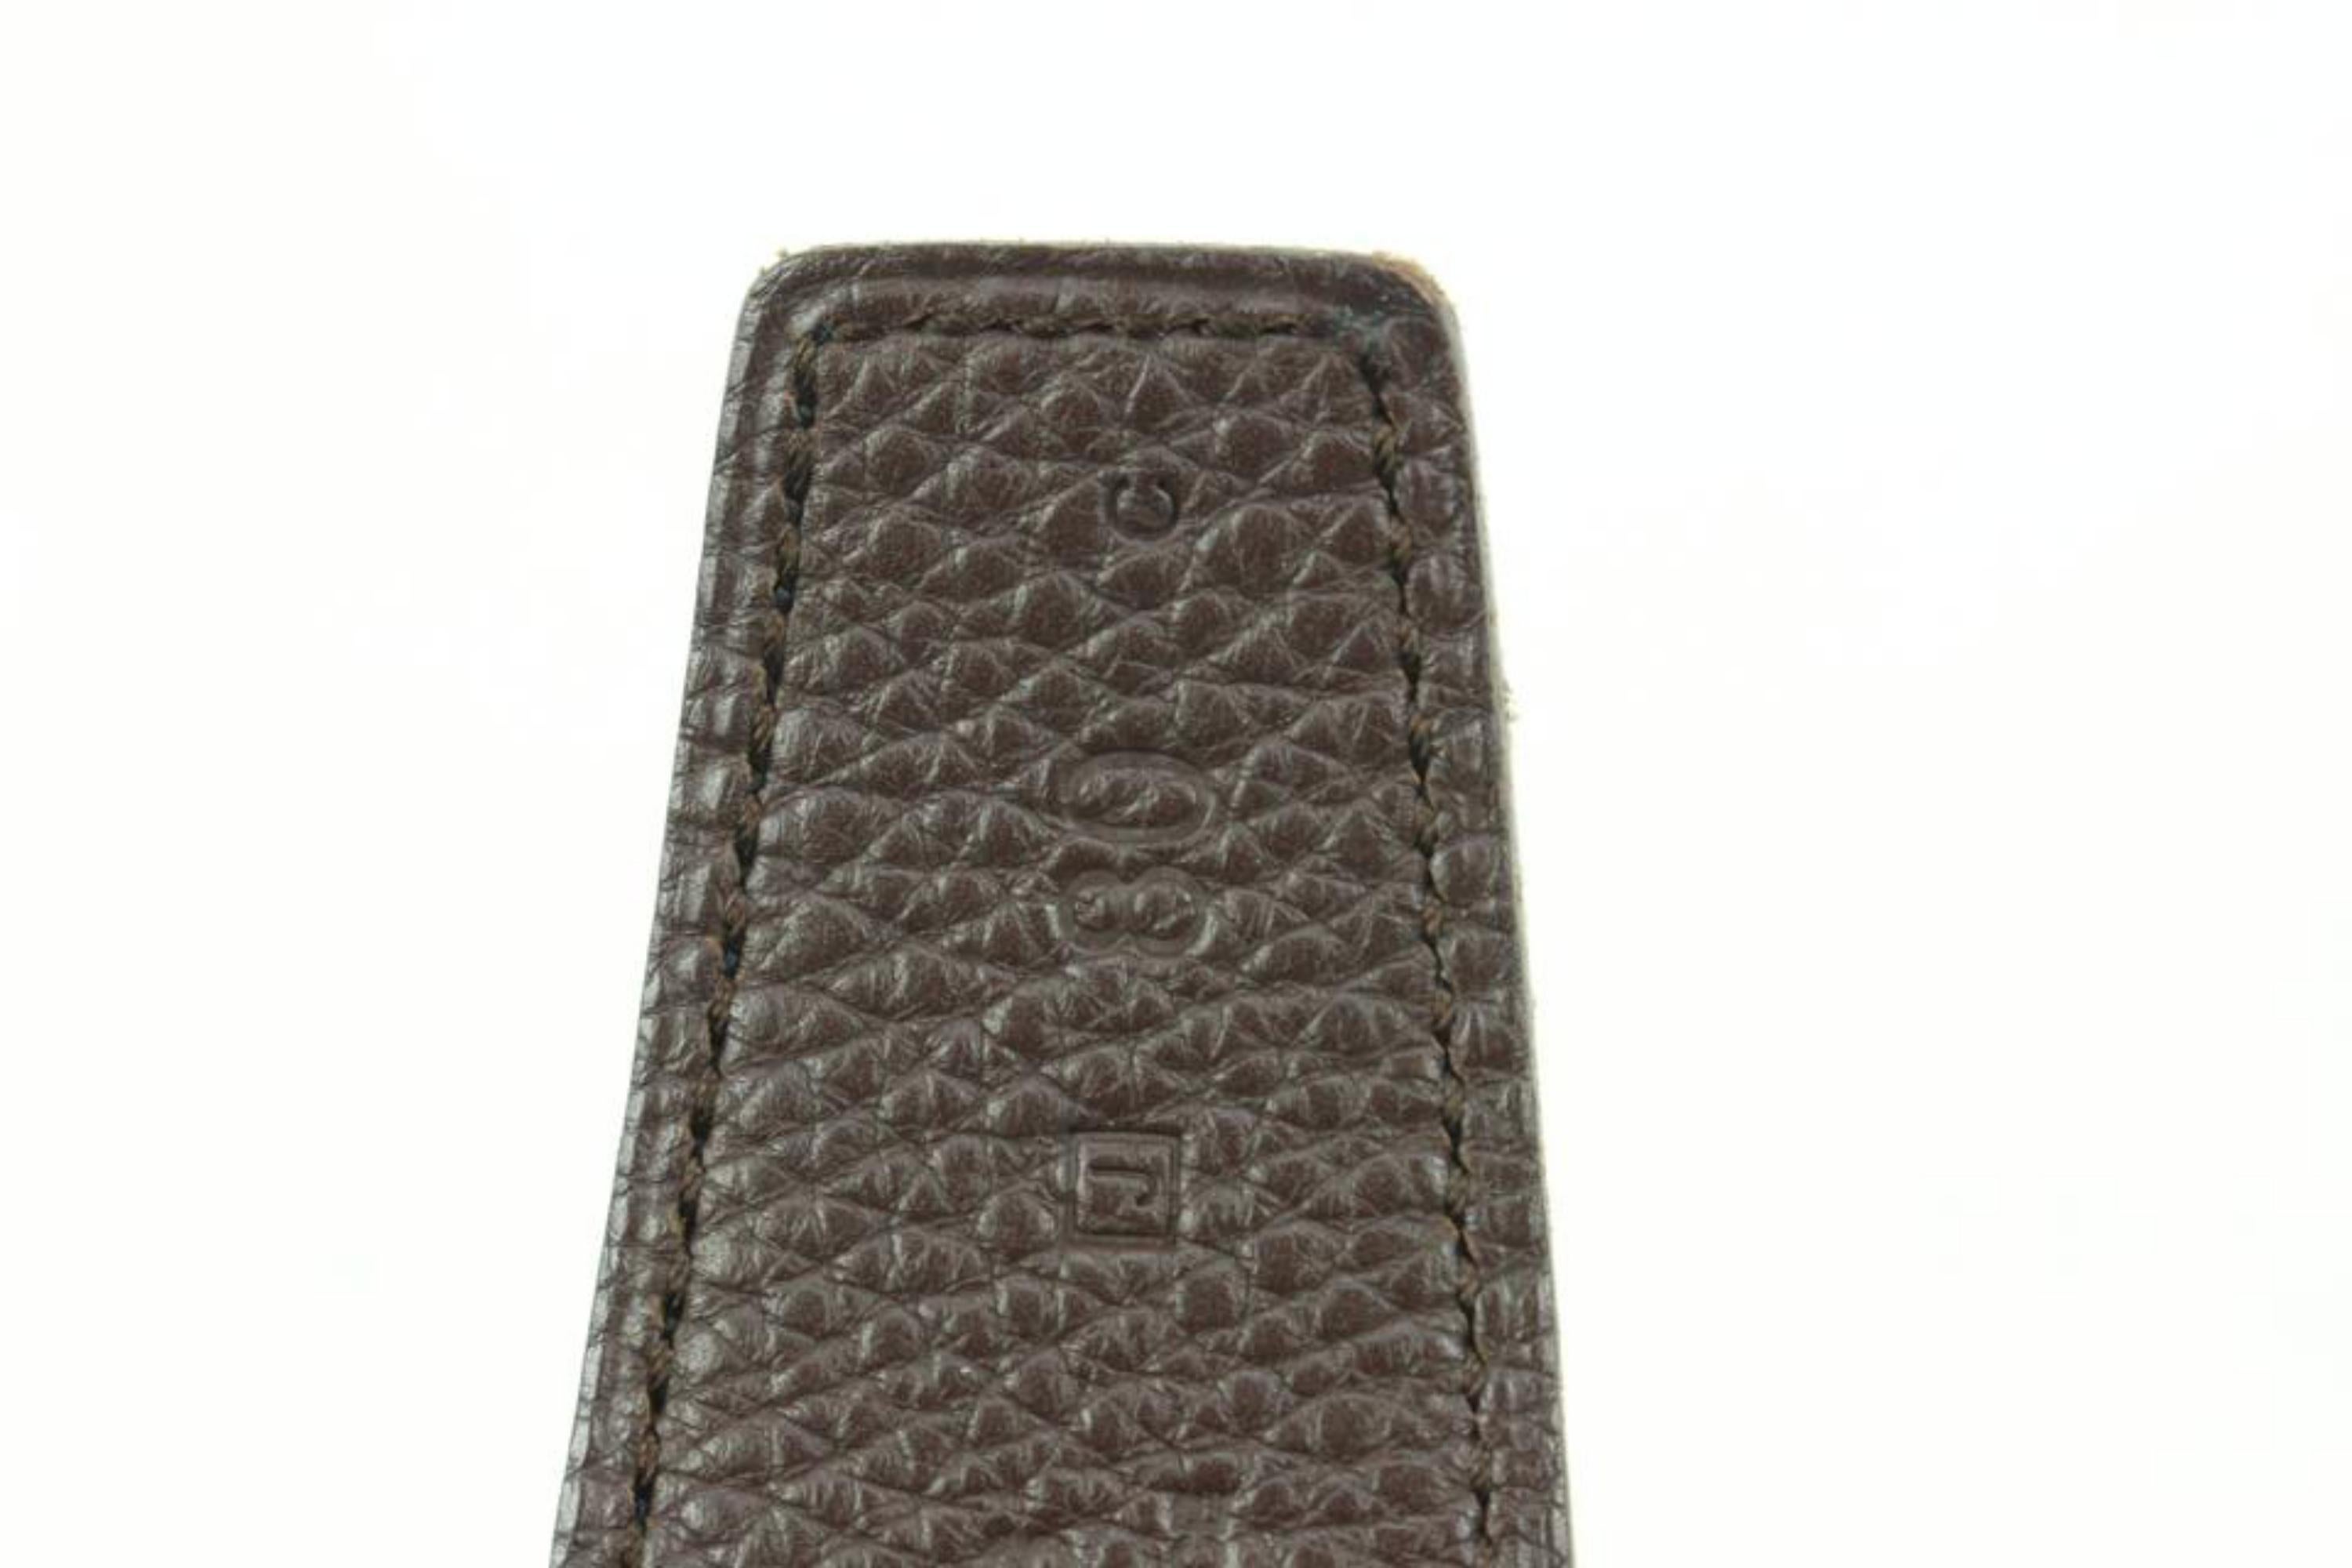 Hermès Black x Brown x SIlver 32mm Reversible Strie H Logo Belt Kit 41he56
Date Code/Serial Number: J in a Square
Made In: France
Measurements: Length:  37